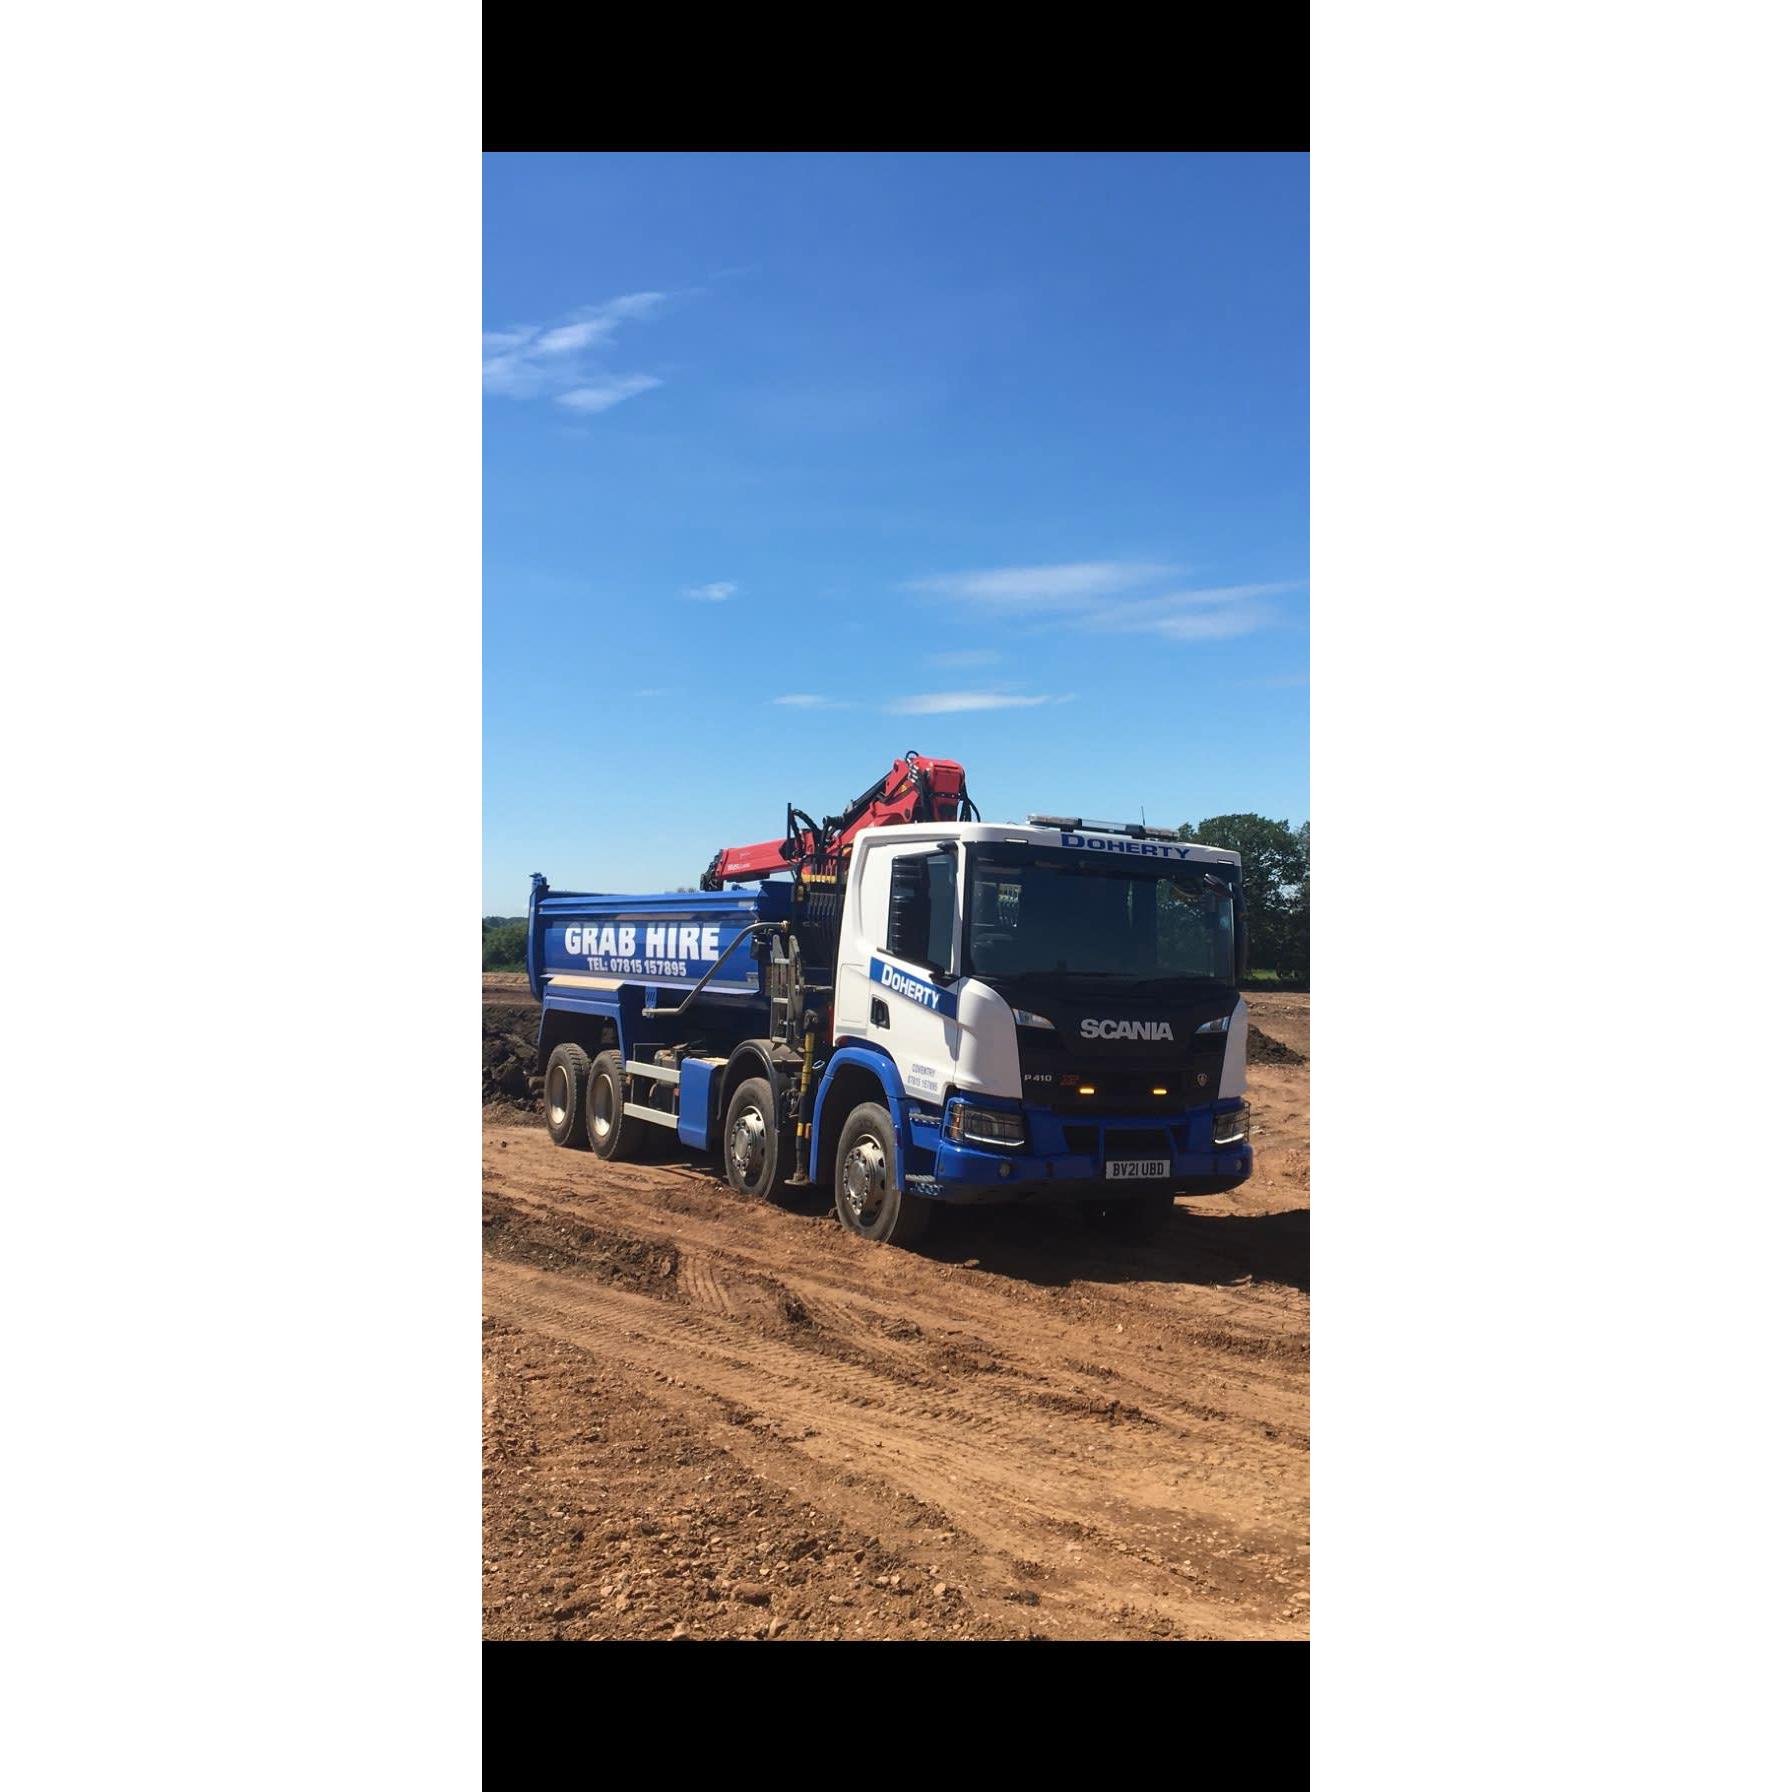 Doherty Grab Hire - Coventry, West Midlands CV6 2AE - 07815 157895 | ShowMeLocal.com